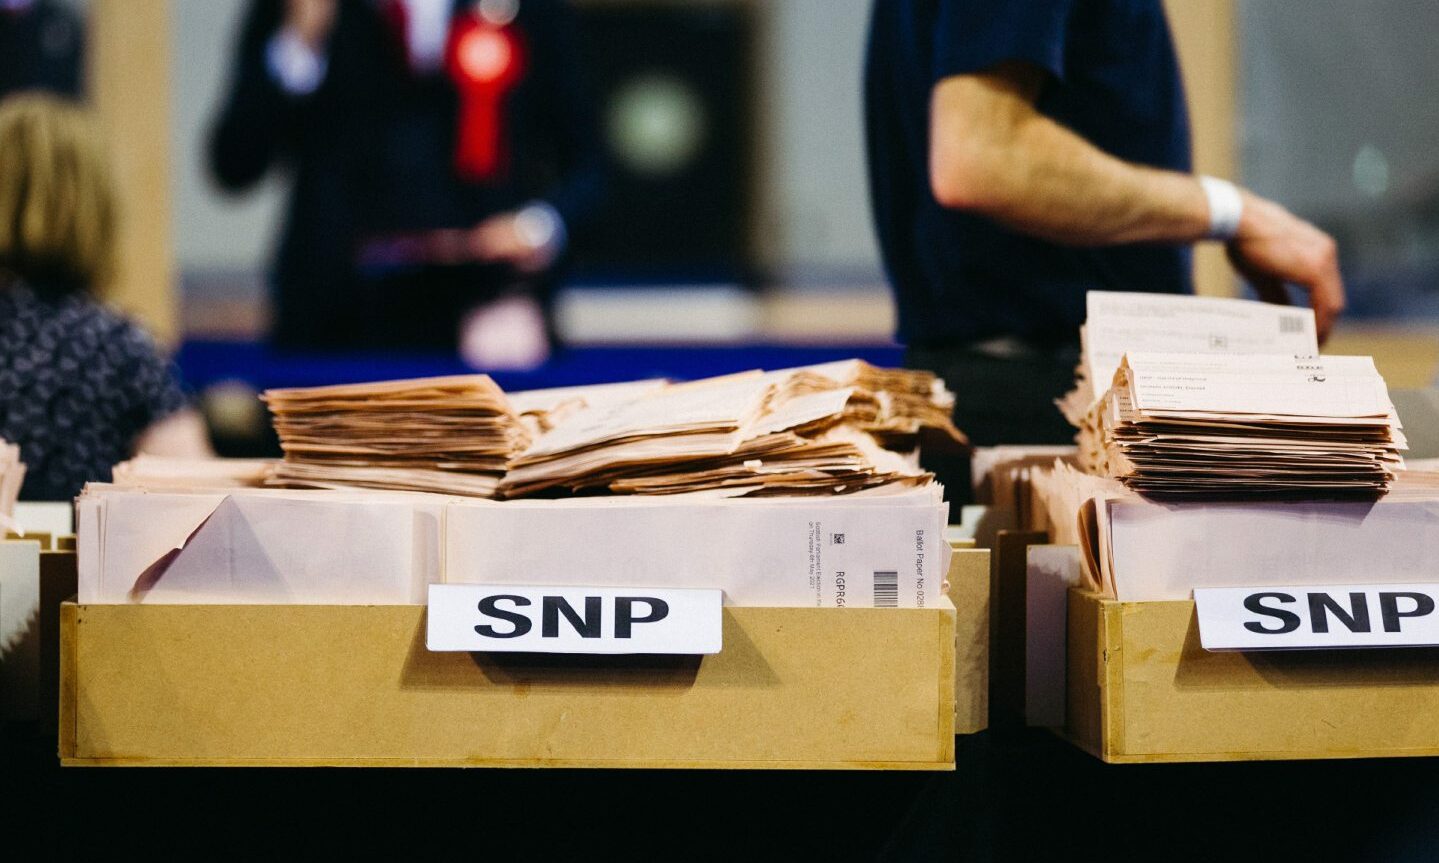 Ballot boxes from Scottish local elections showing SNP votes